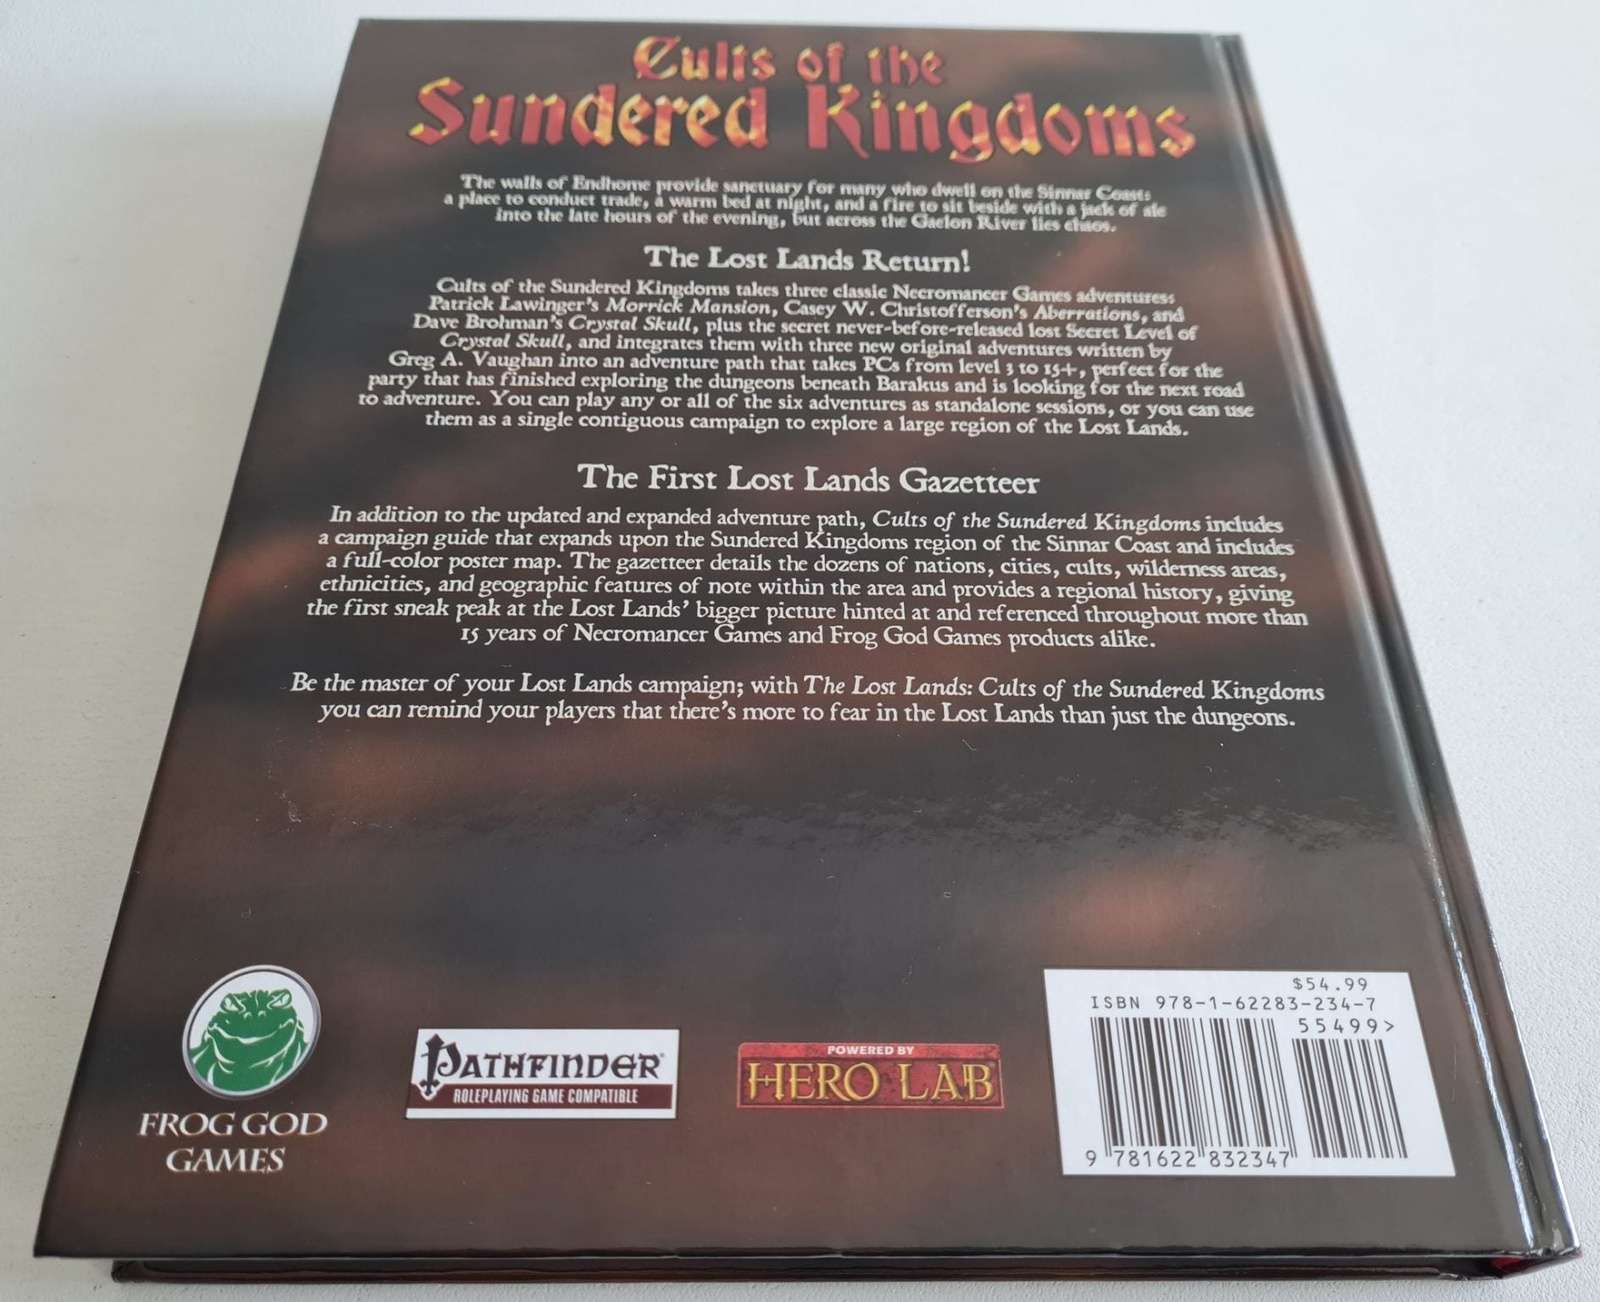 Pathfinder - The Lost Lands - Cults of the Sundered Kingdoms 1e